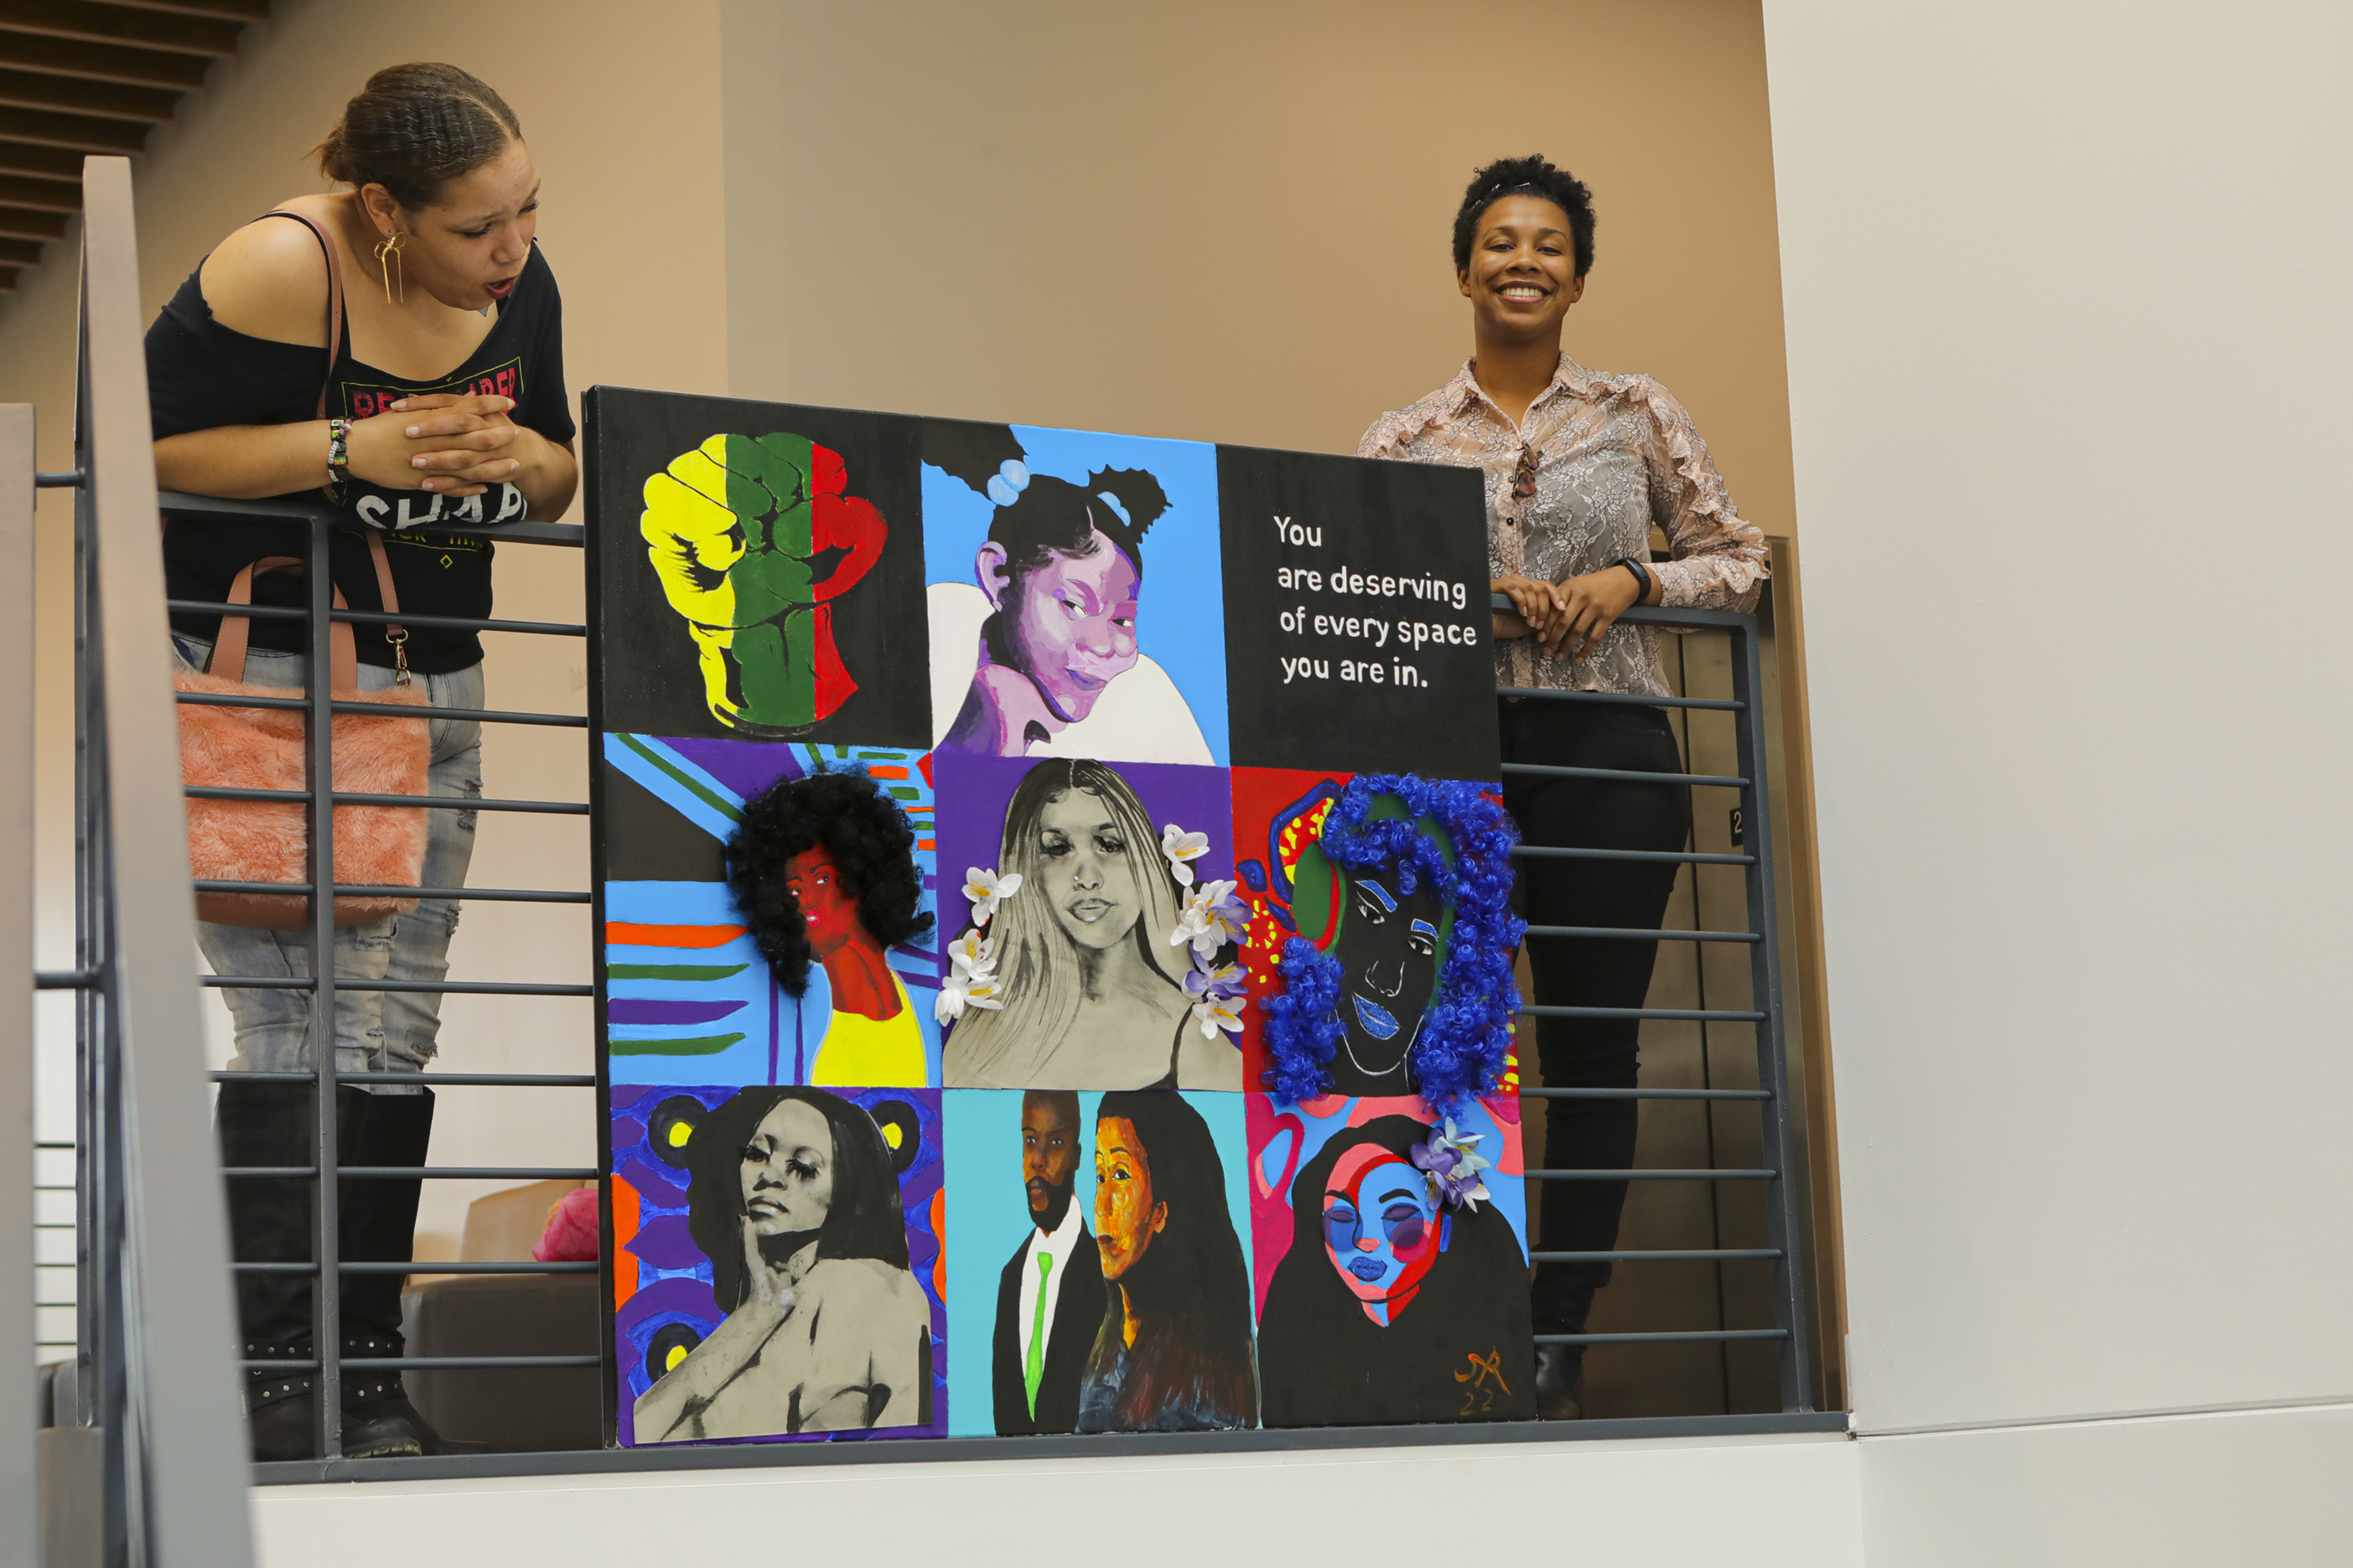 Columbus State student Le'Ken Stokes, president of Columbus States Black Student Union, on the left, helps local artist Simone Robinson as she unveils her new artwork in the lobby of Mitchell Hall on April 12.